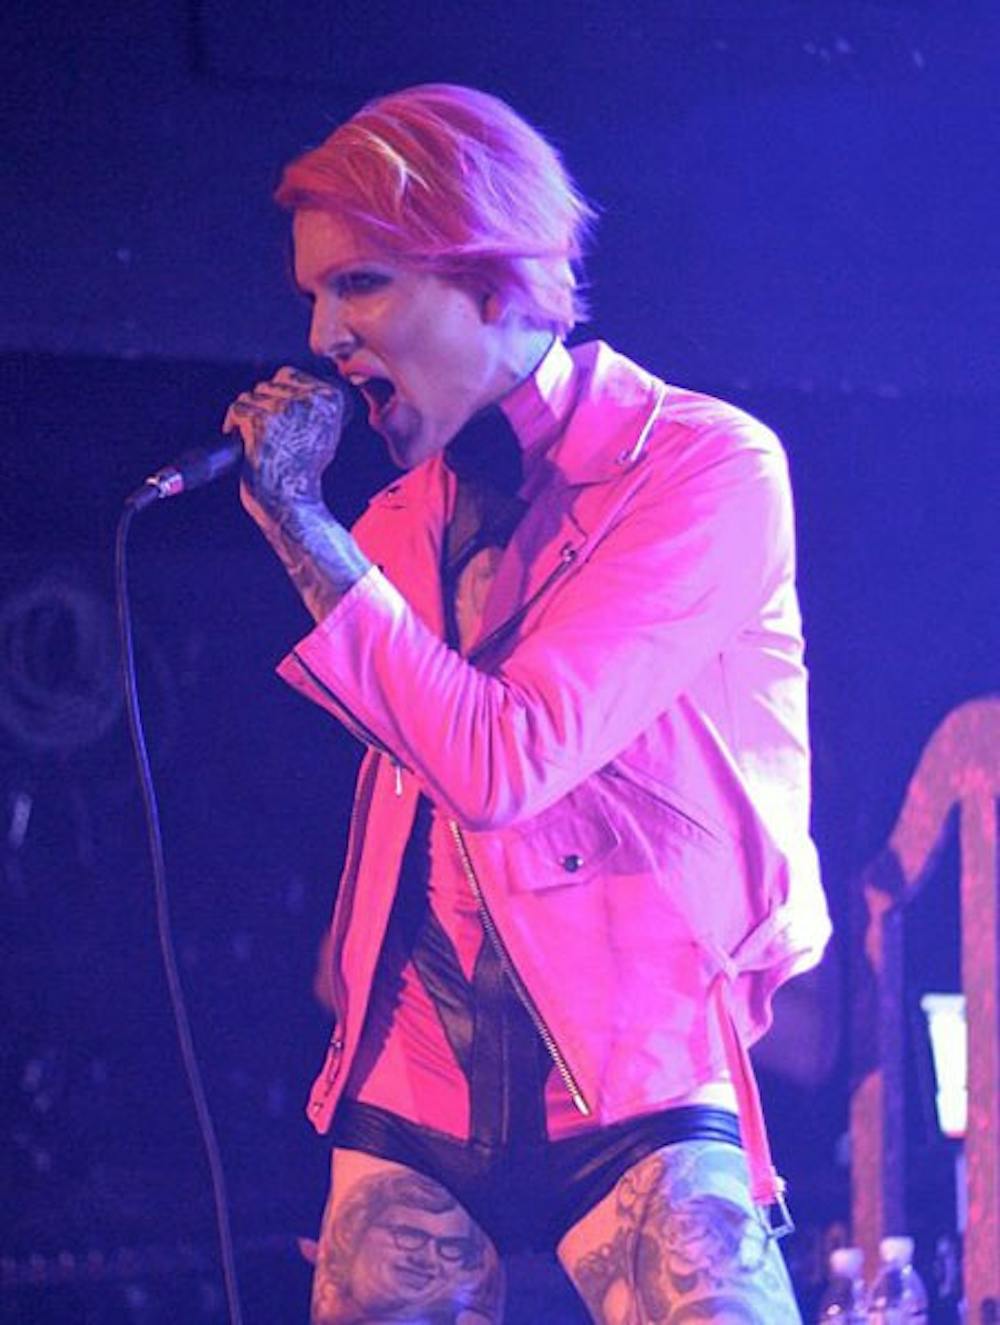 Electro-pop diva Jeffree Star put on a risqué performance at Martini Ranch on Wednesday. (Photo courtesy of KJ Mark)